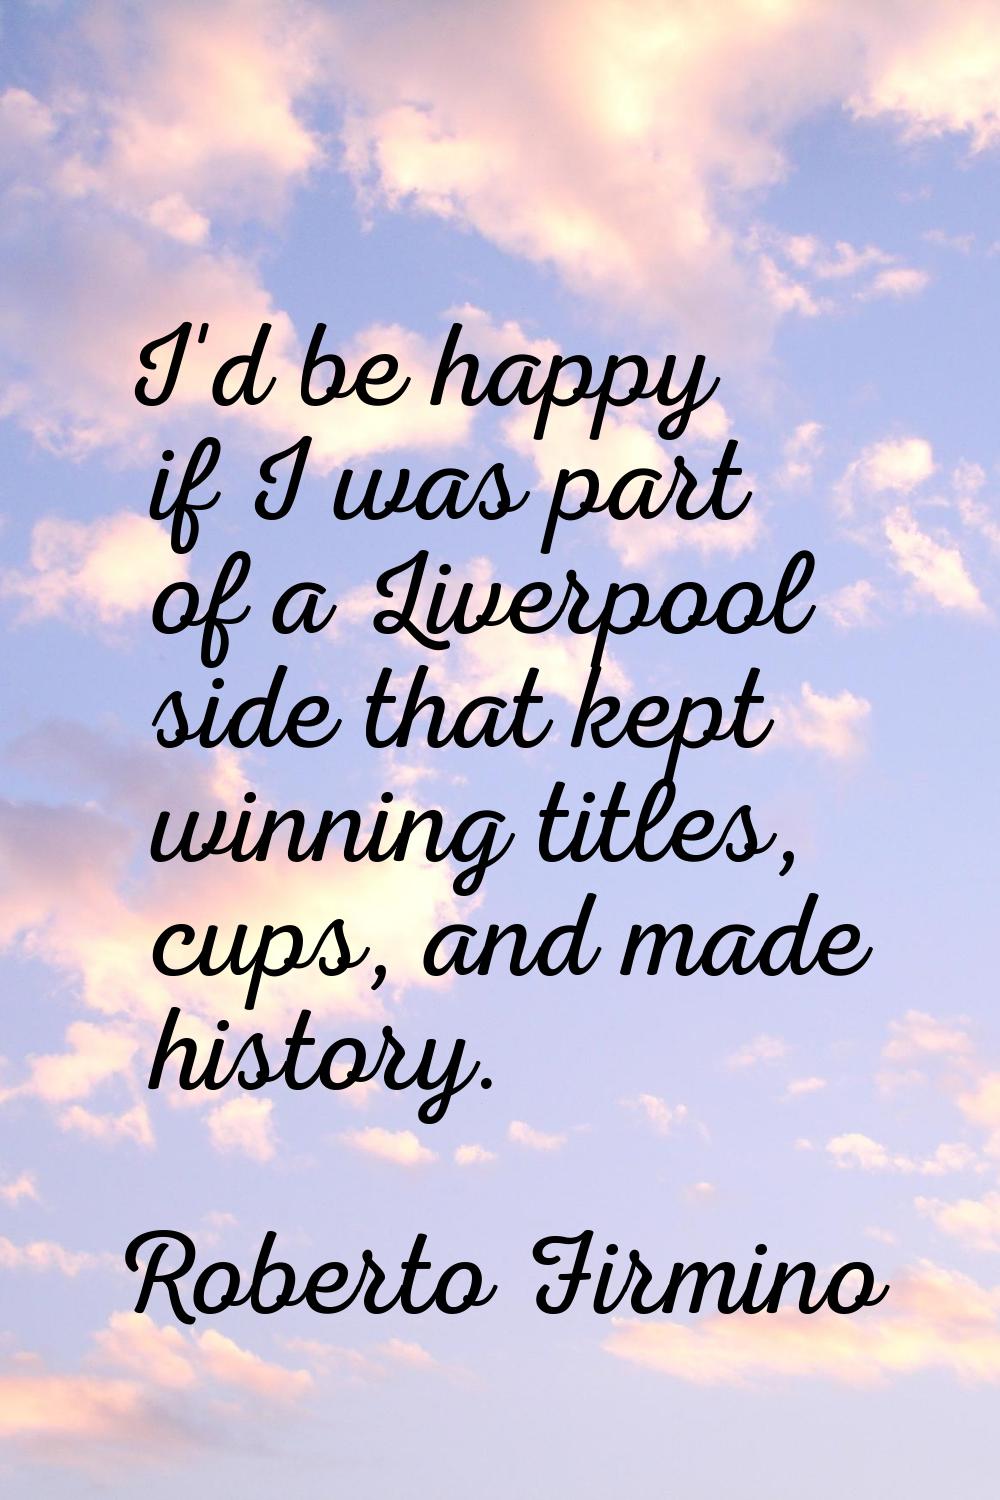 I'd be happy if I was part of a Liverpool side that kept winning titles, cups, and made history.